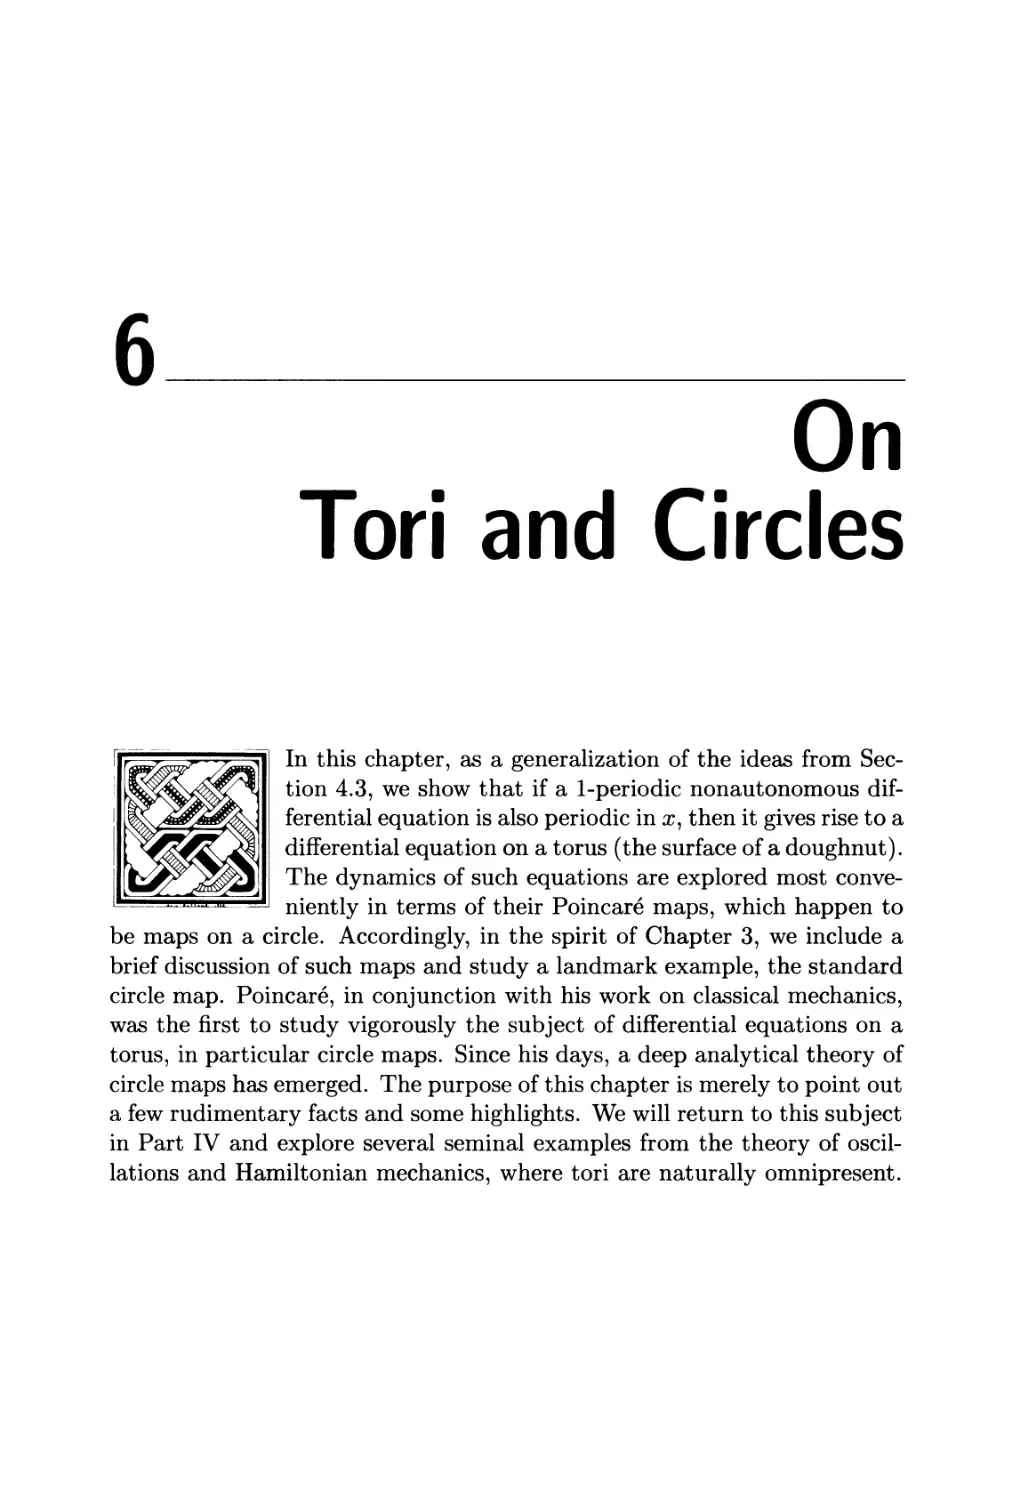 Chapter 6. On Tori and Circles